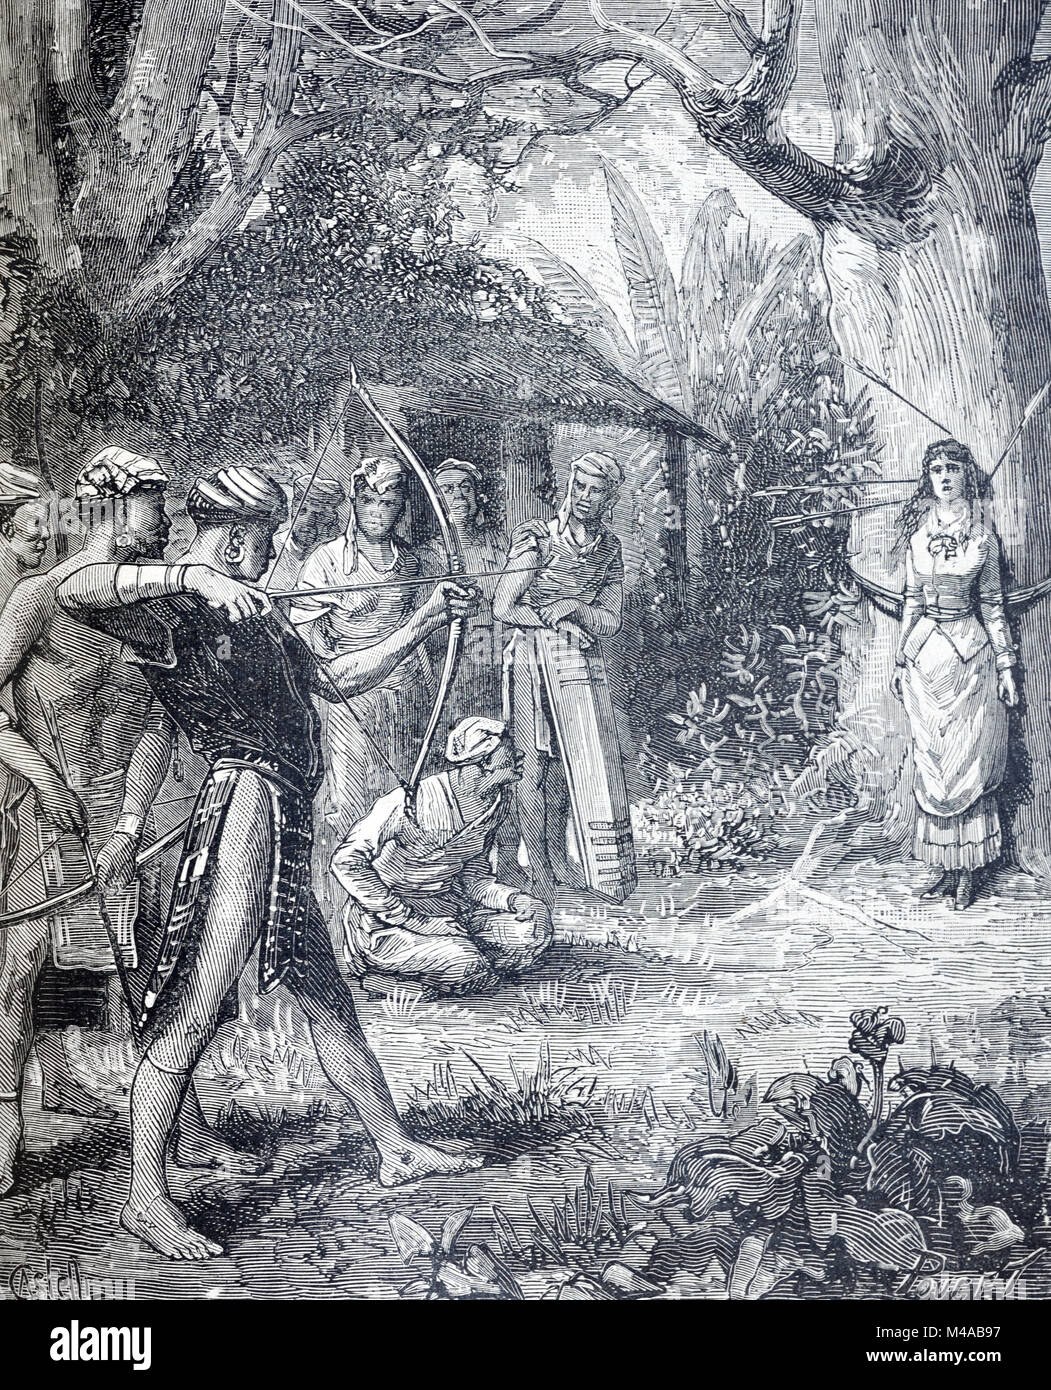 Tribal Group Practice a Dangerous Form of Archery in Barrackpore or Barrackpur, West Bengal, India (Engraving, 1880). The game ressembles the story of William Tell or Robin Hood Shooting an apple from the head of Maid Marion. (Engraving, 1880) Stock Photo